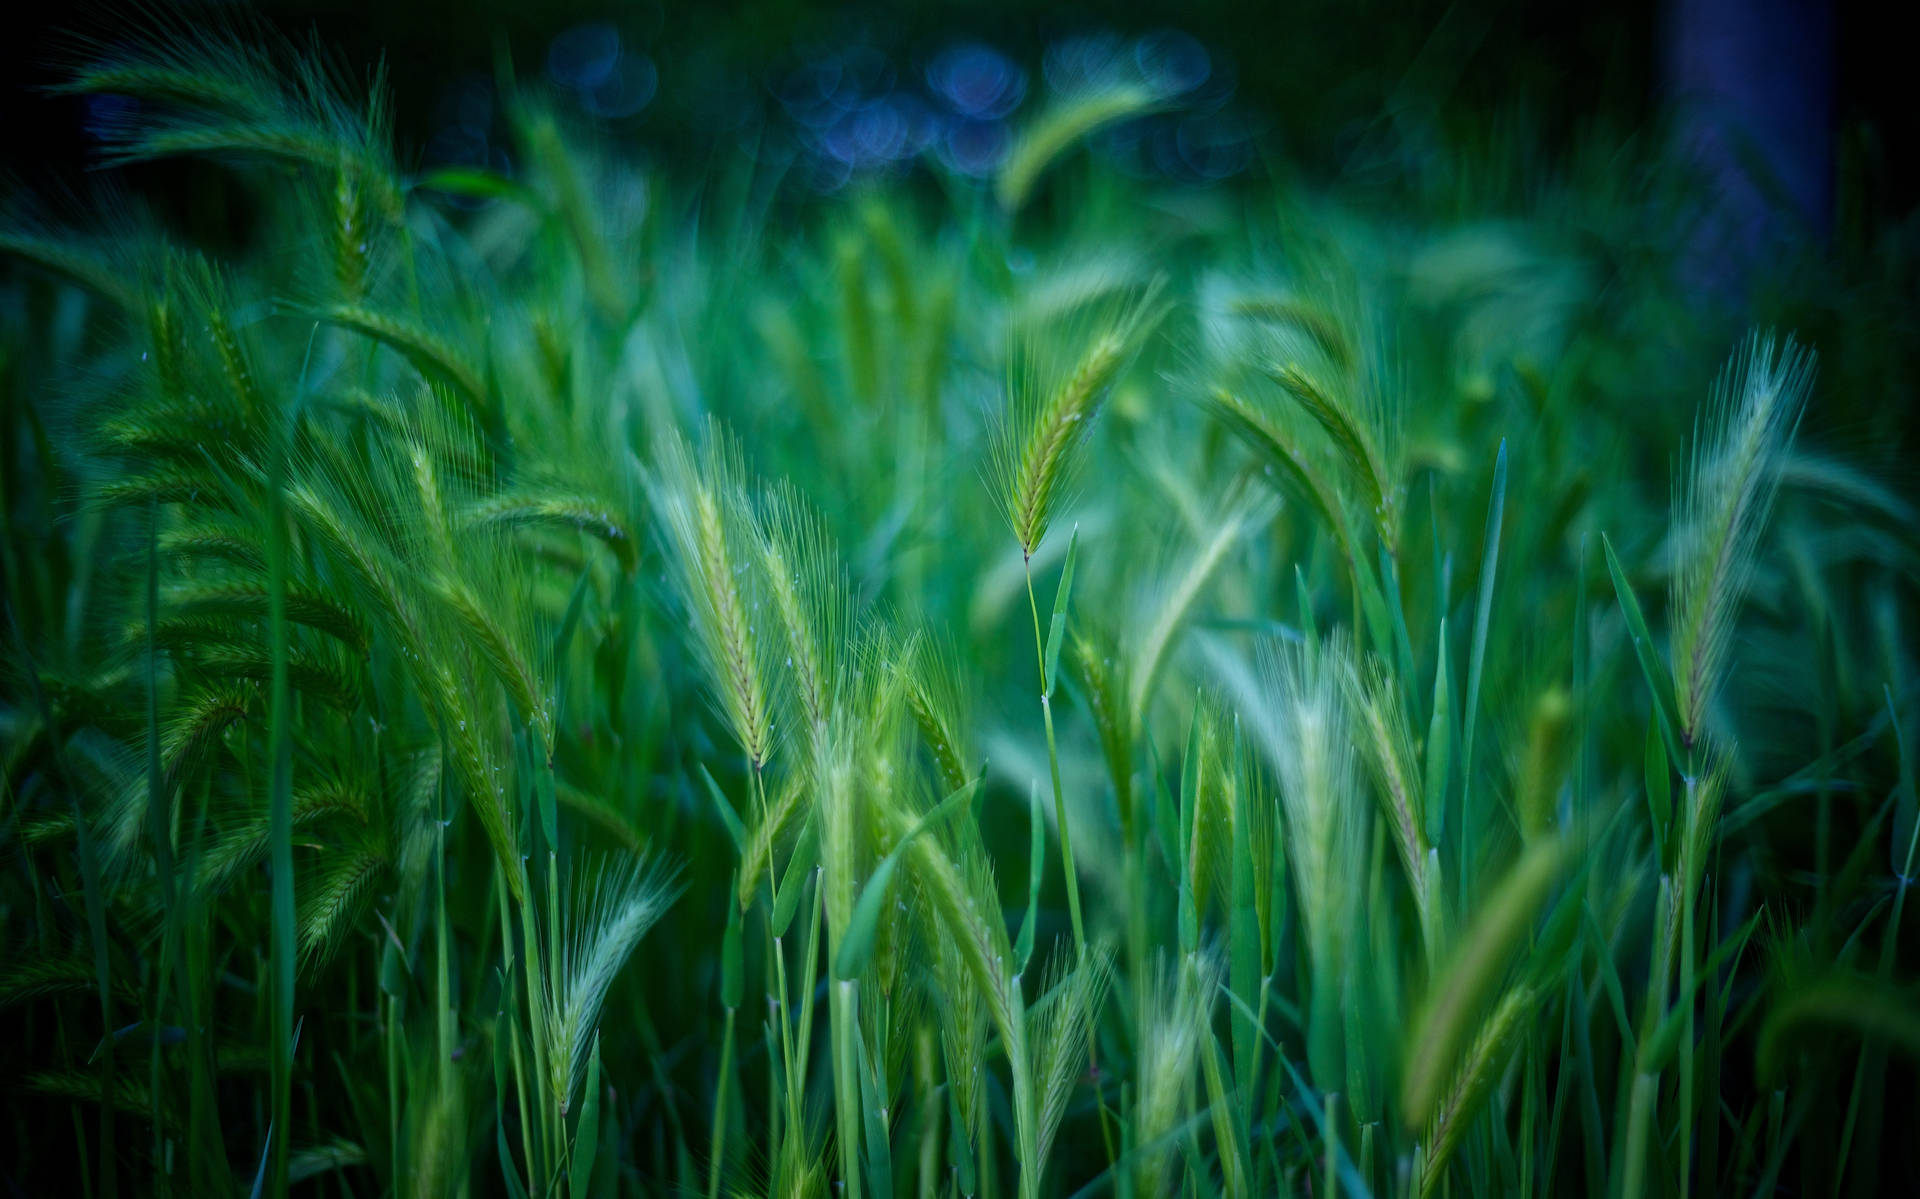 Grass 5211X3255 Wallpaper and Background Image